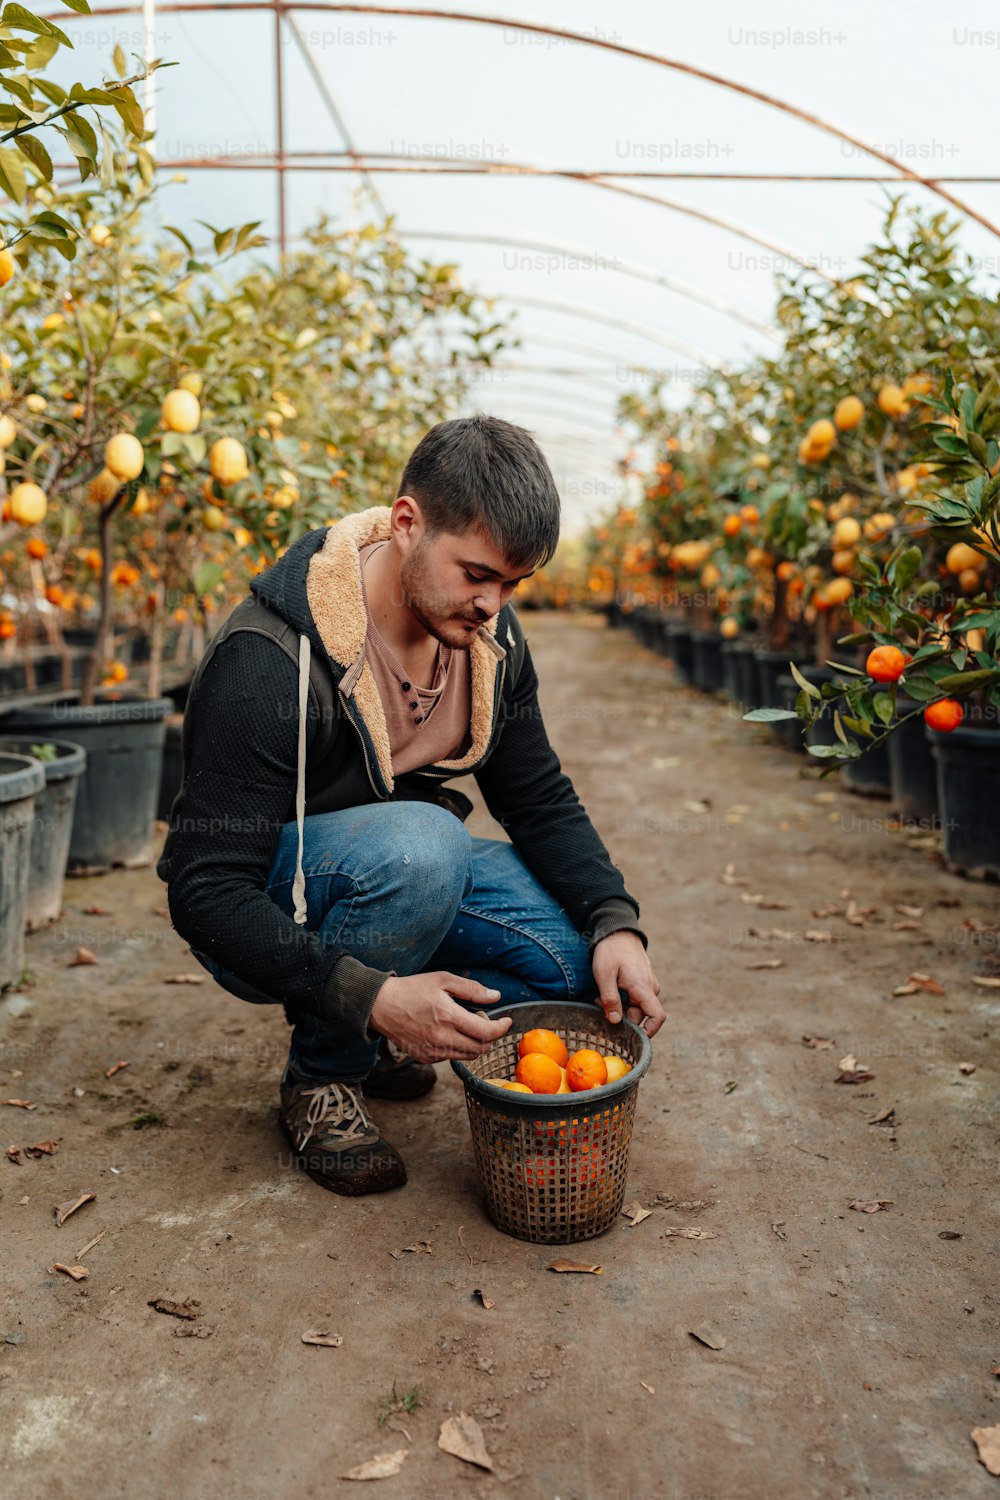 a man kneeling down in a greenhouse picking oranges